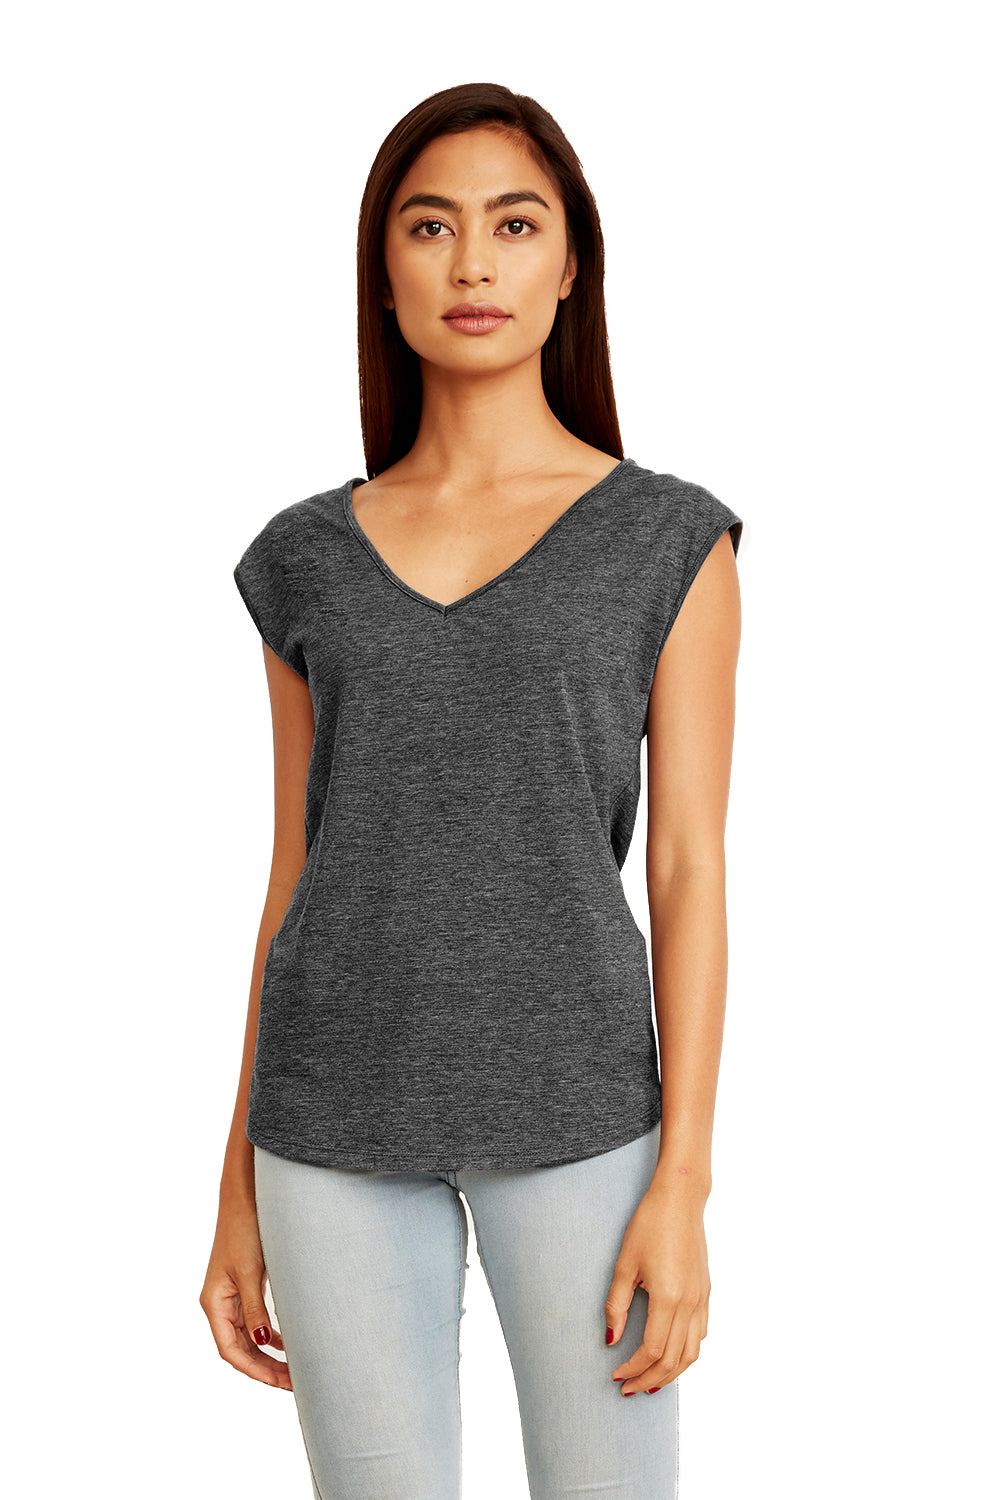 Next Level N5040 Womens Festival Tank Top Charcoal Grey Front